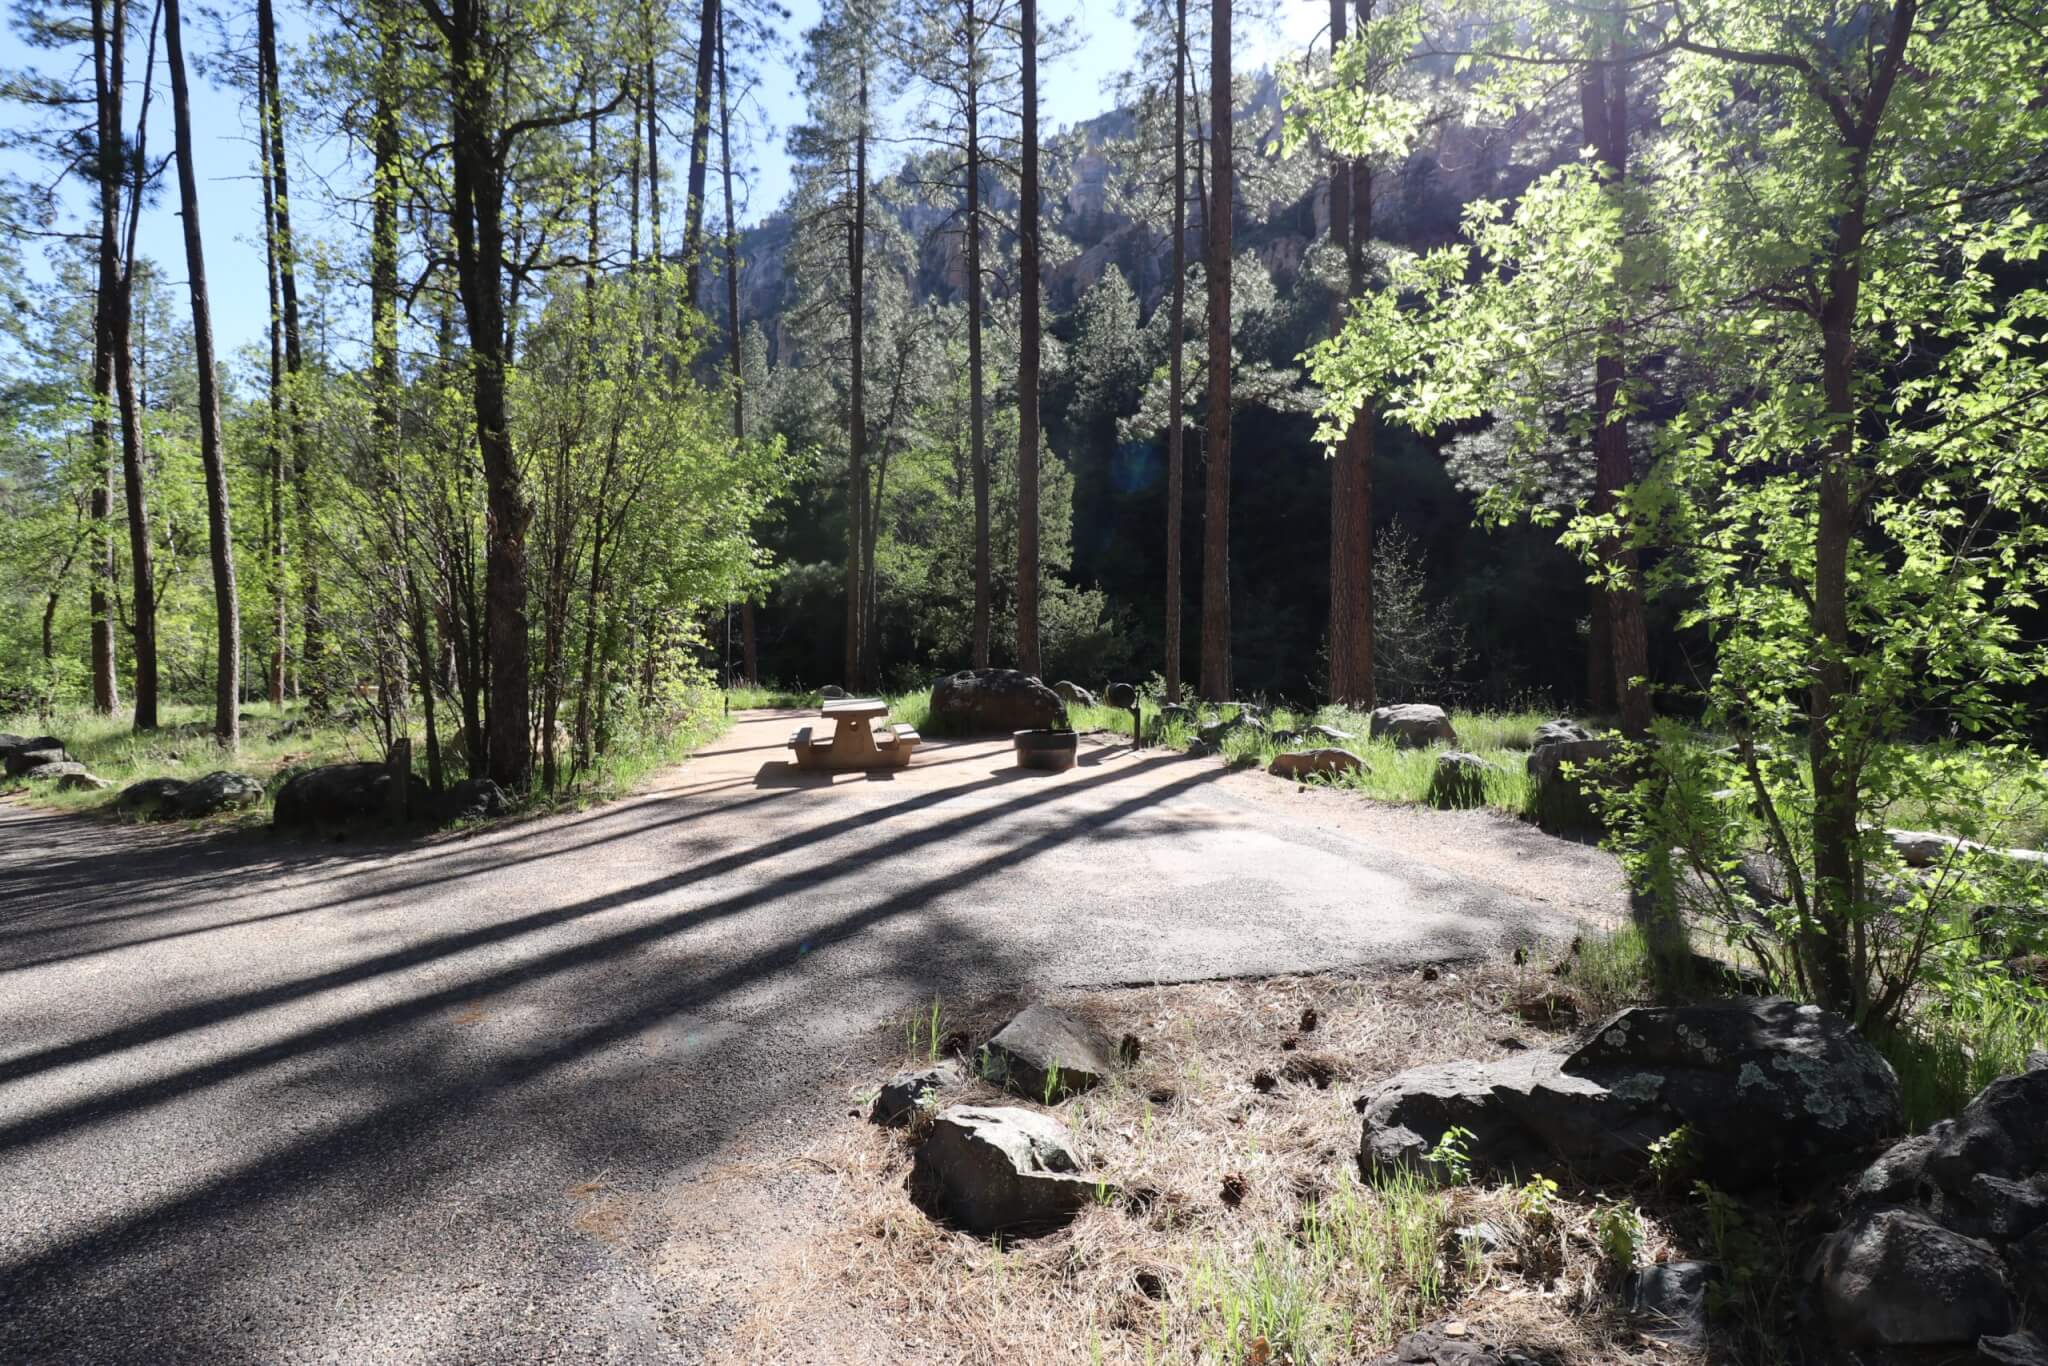 Sedona Area Campgrounds to reopen on May 20, 2020 - Pine Flat #26